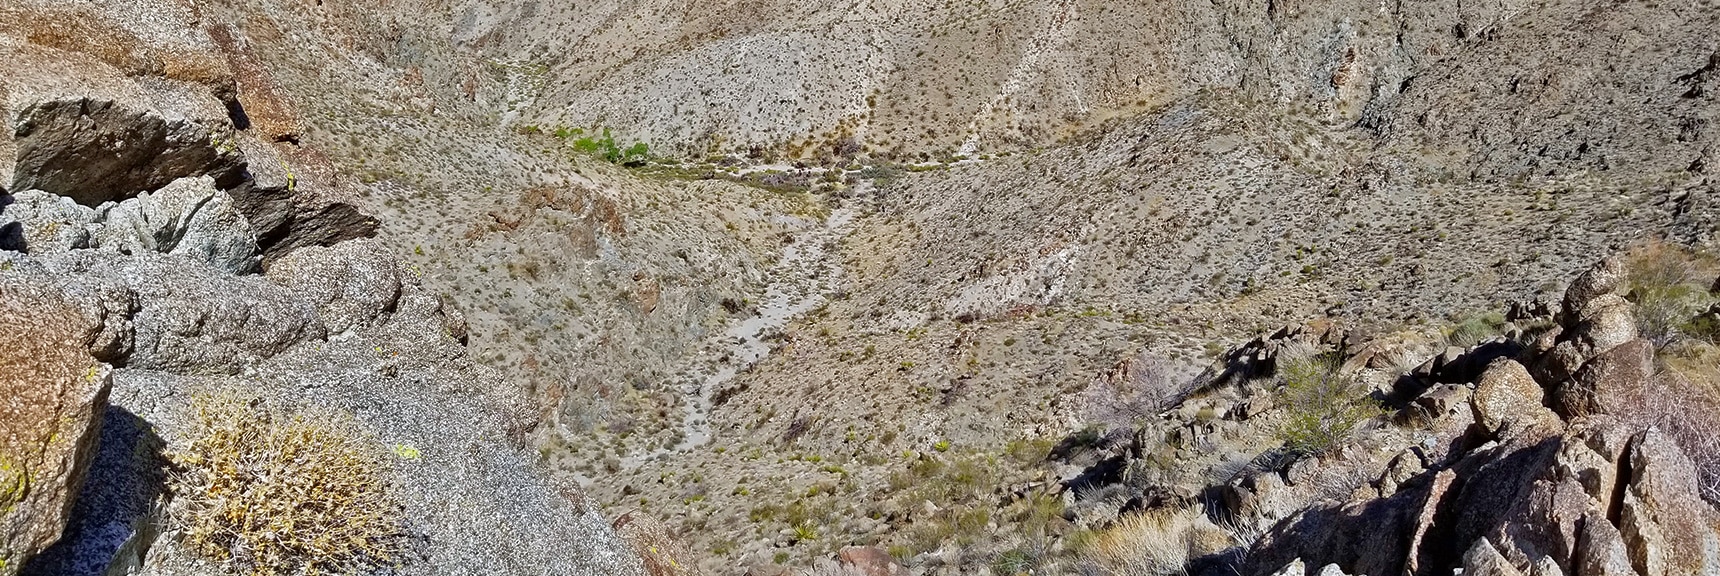 Aerial View of Horse Thief Canyon Springs and Canyon Intersection | Mt. Wilson | Lake Mead National Recreation Area, Arizona